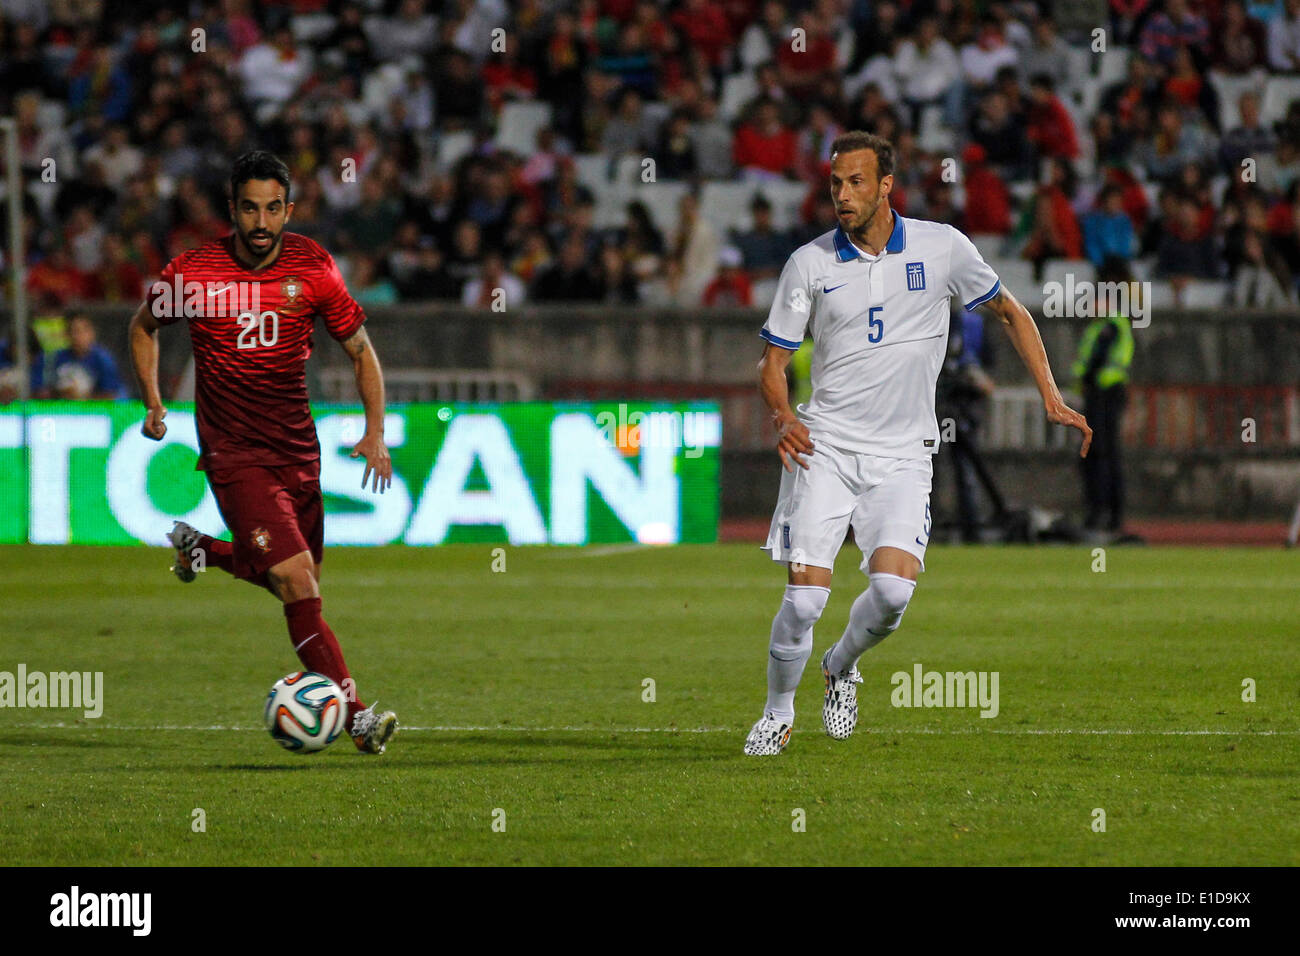 Lisbon, Porrtugal. 31st May, 2014. Portugal midfielder Ruben Amorin (20) (left), and Greece defender Vangelis Moras (5) (right) during preparatory friendly match for the World Cup at the National Stadium in Lisbon, Portugal, Saturday, May 31, 2014. Credit:  Leonardo Mota/Alamy Live News Stock Photo